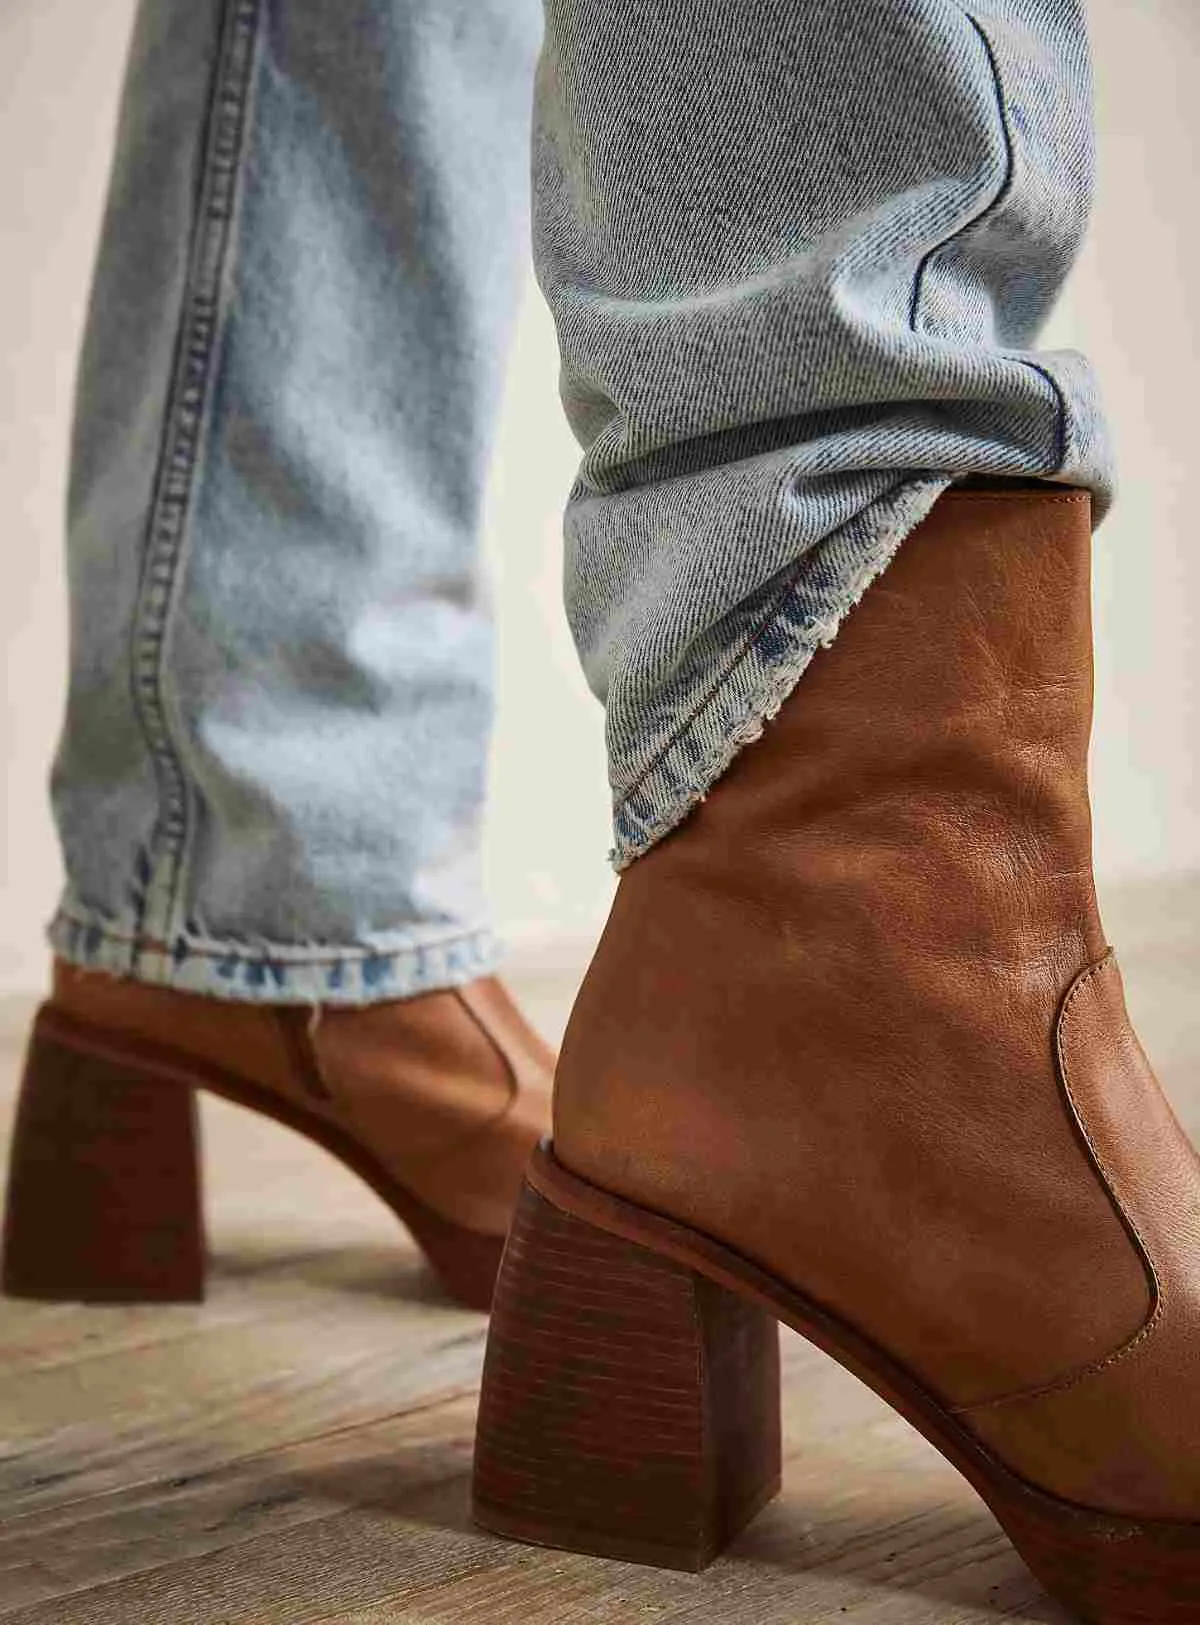 Close up of women's feet wearing chunky heel brown ankle boots with light wash jeans, one pant leg half tucked into boot.